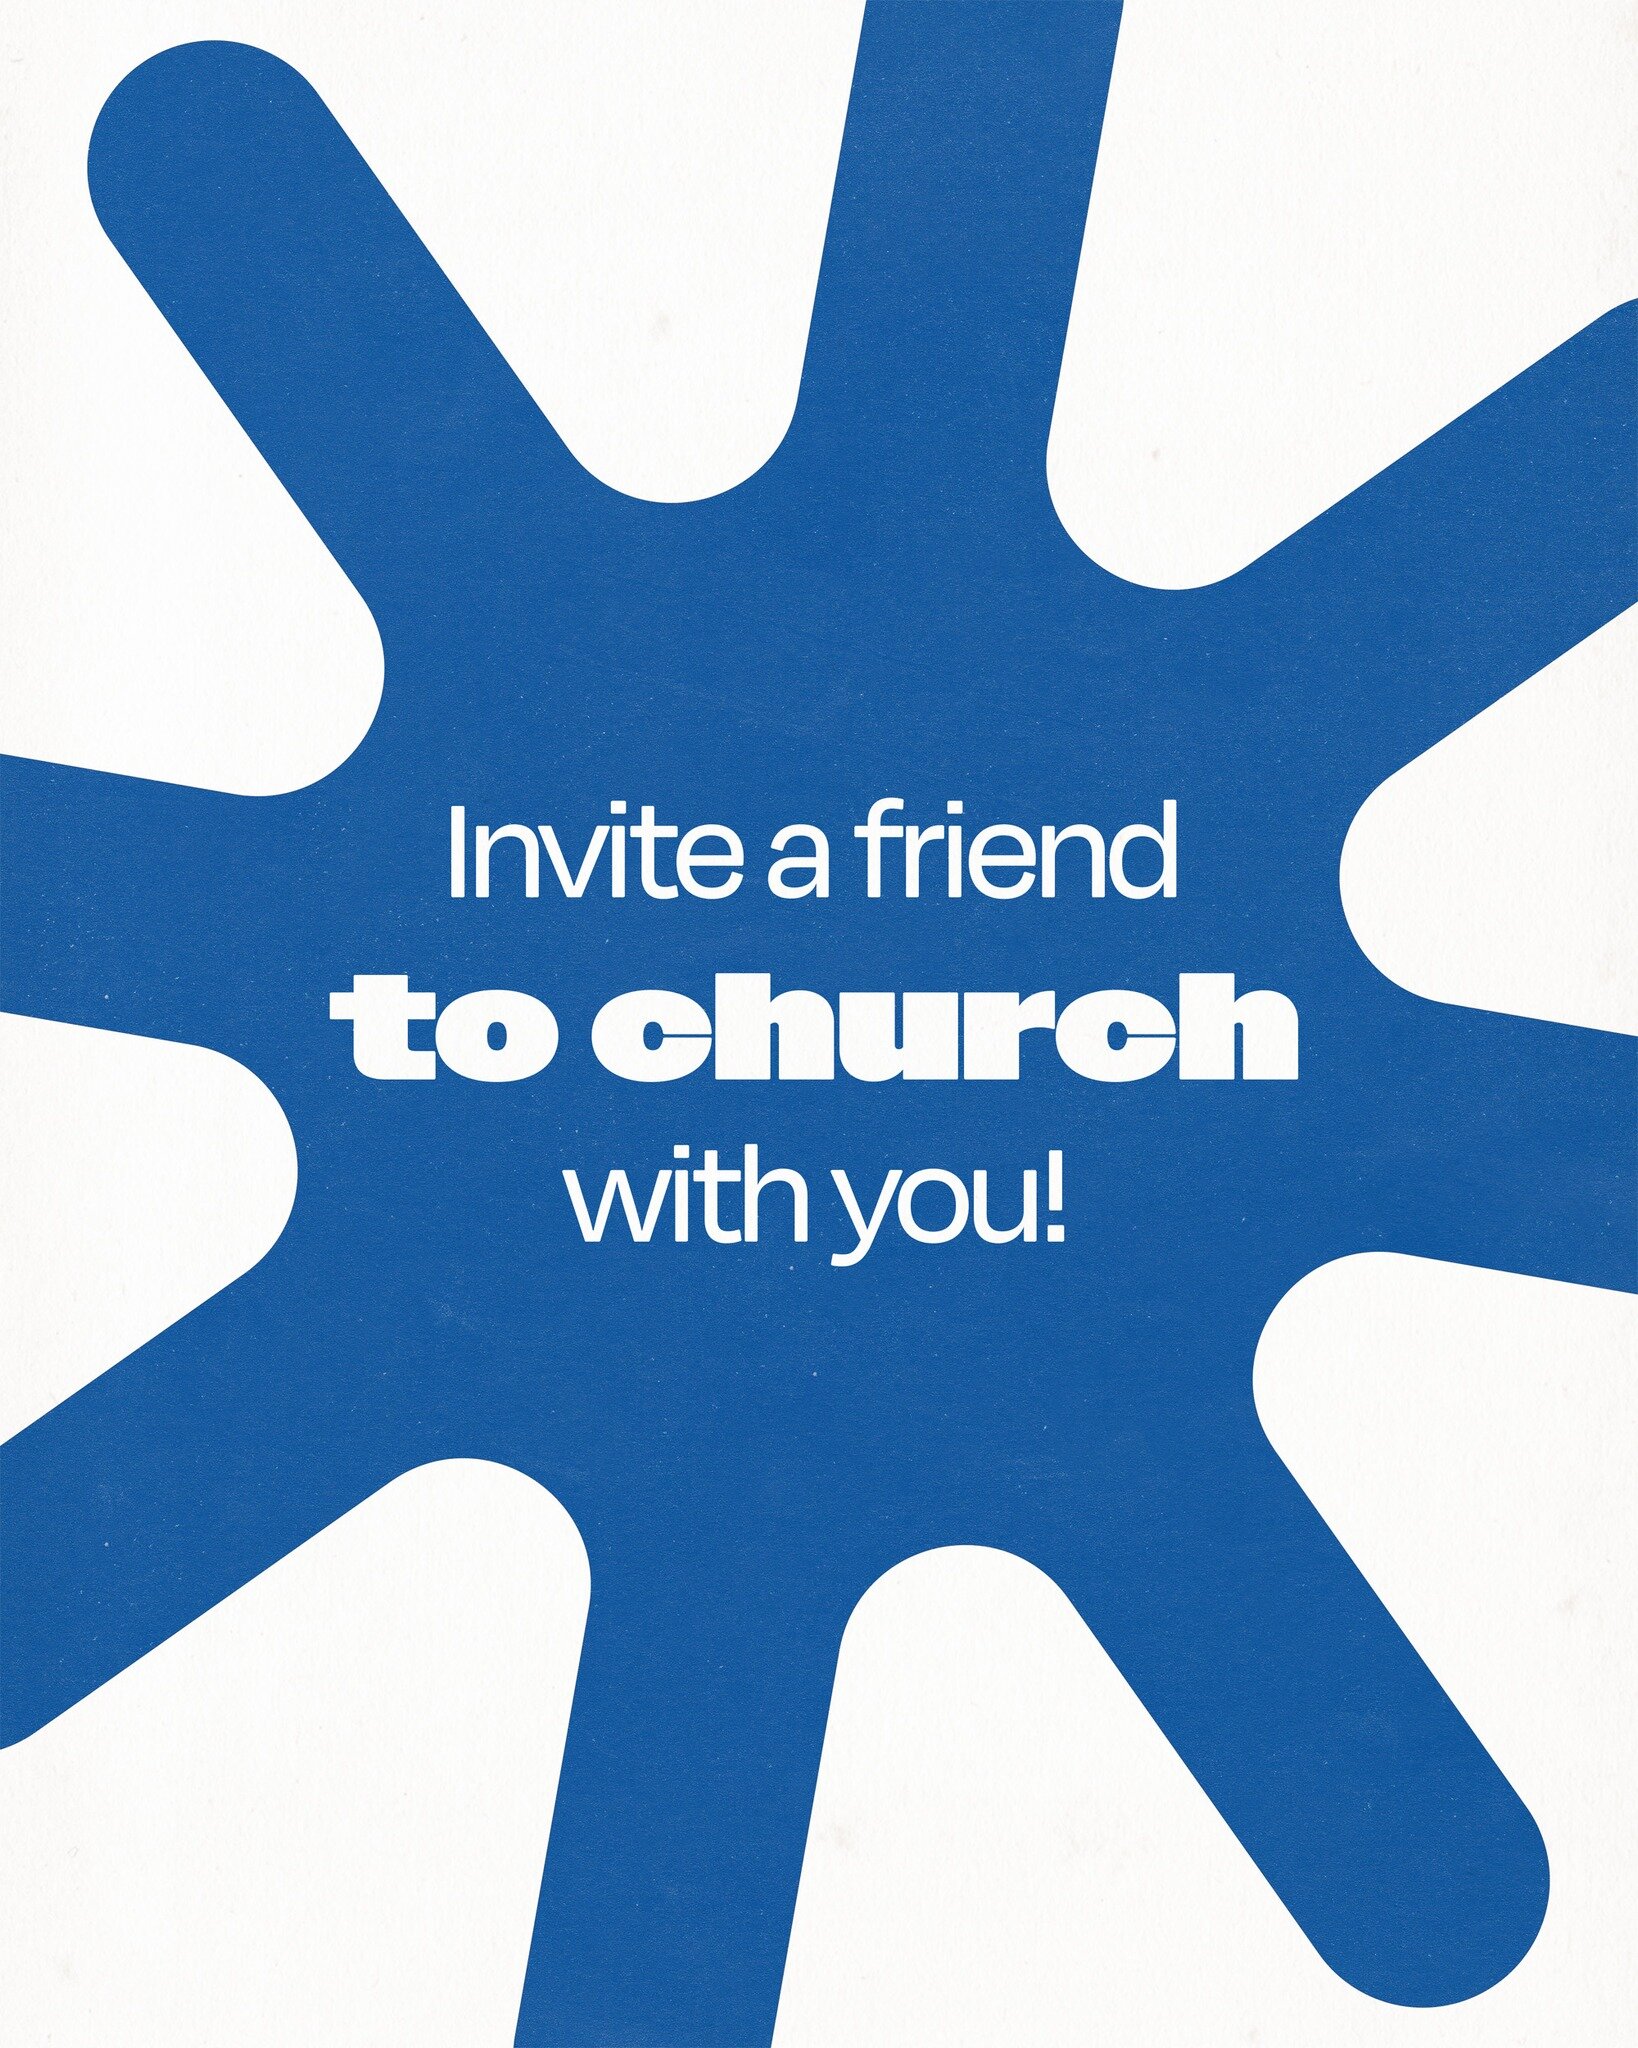 One simple invitation could change your friend's eternity!